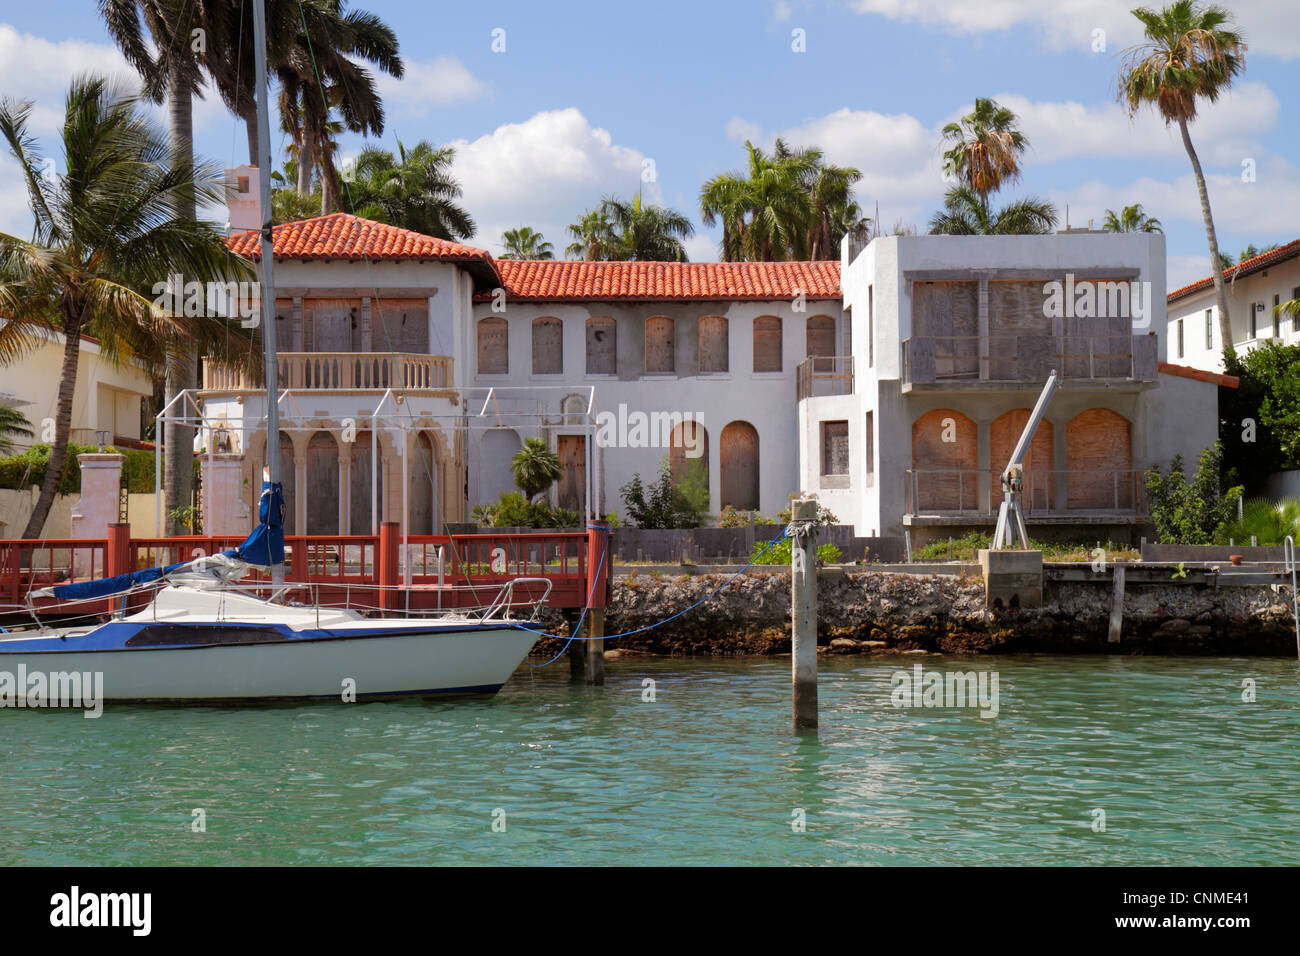 Miami Beach Florida,Biscayne Bay,Palm Island,49 Palm Avenue,waterfront home,mansion,celebrity,boarded up,FL120331125 Stock Photo